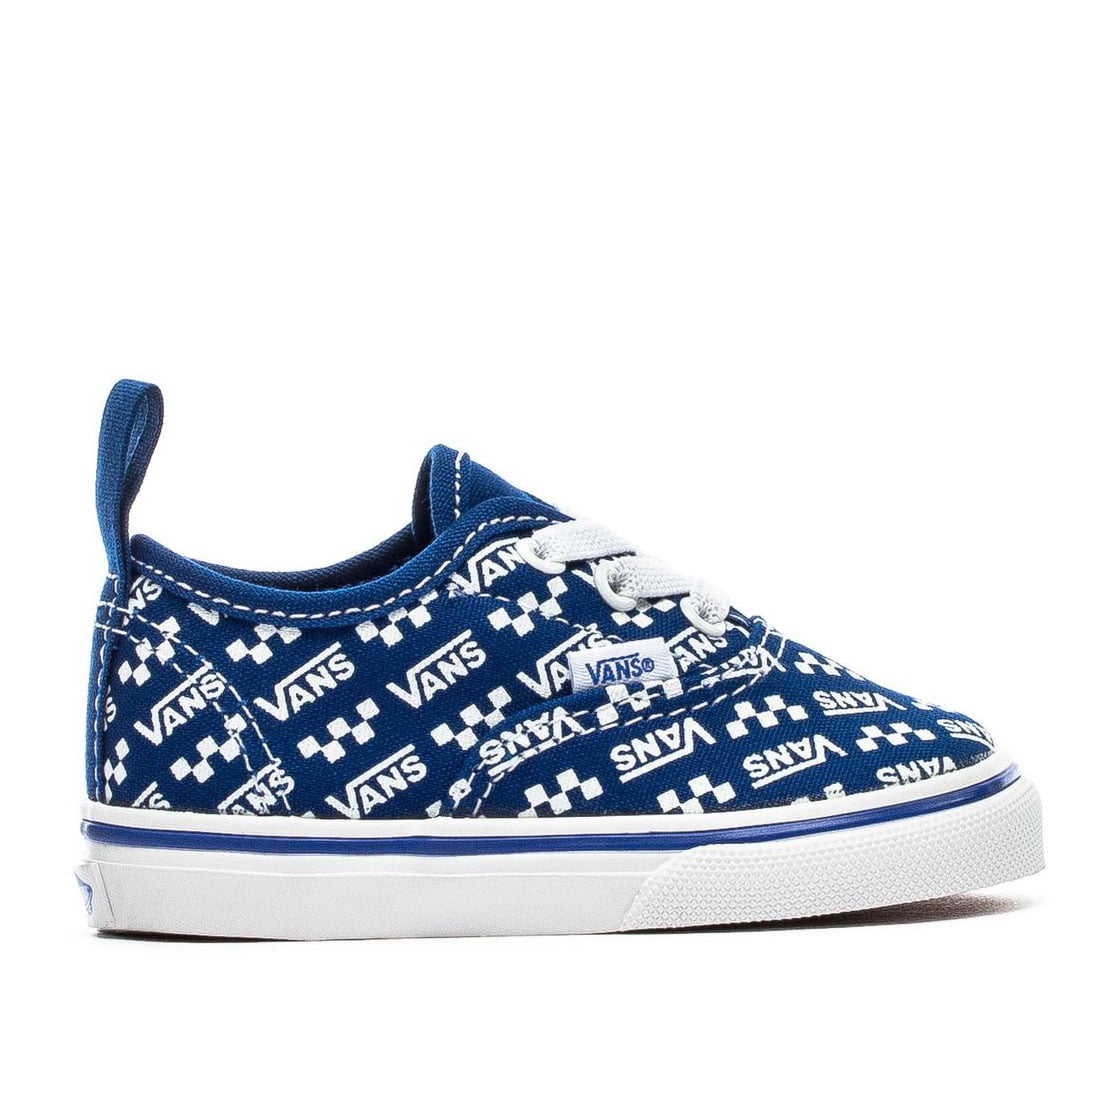 Authentic shoe size Toddler Athletics VN0A4BUYWH8 ((Logo Repeat) True Blue/True) - Walmart.com